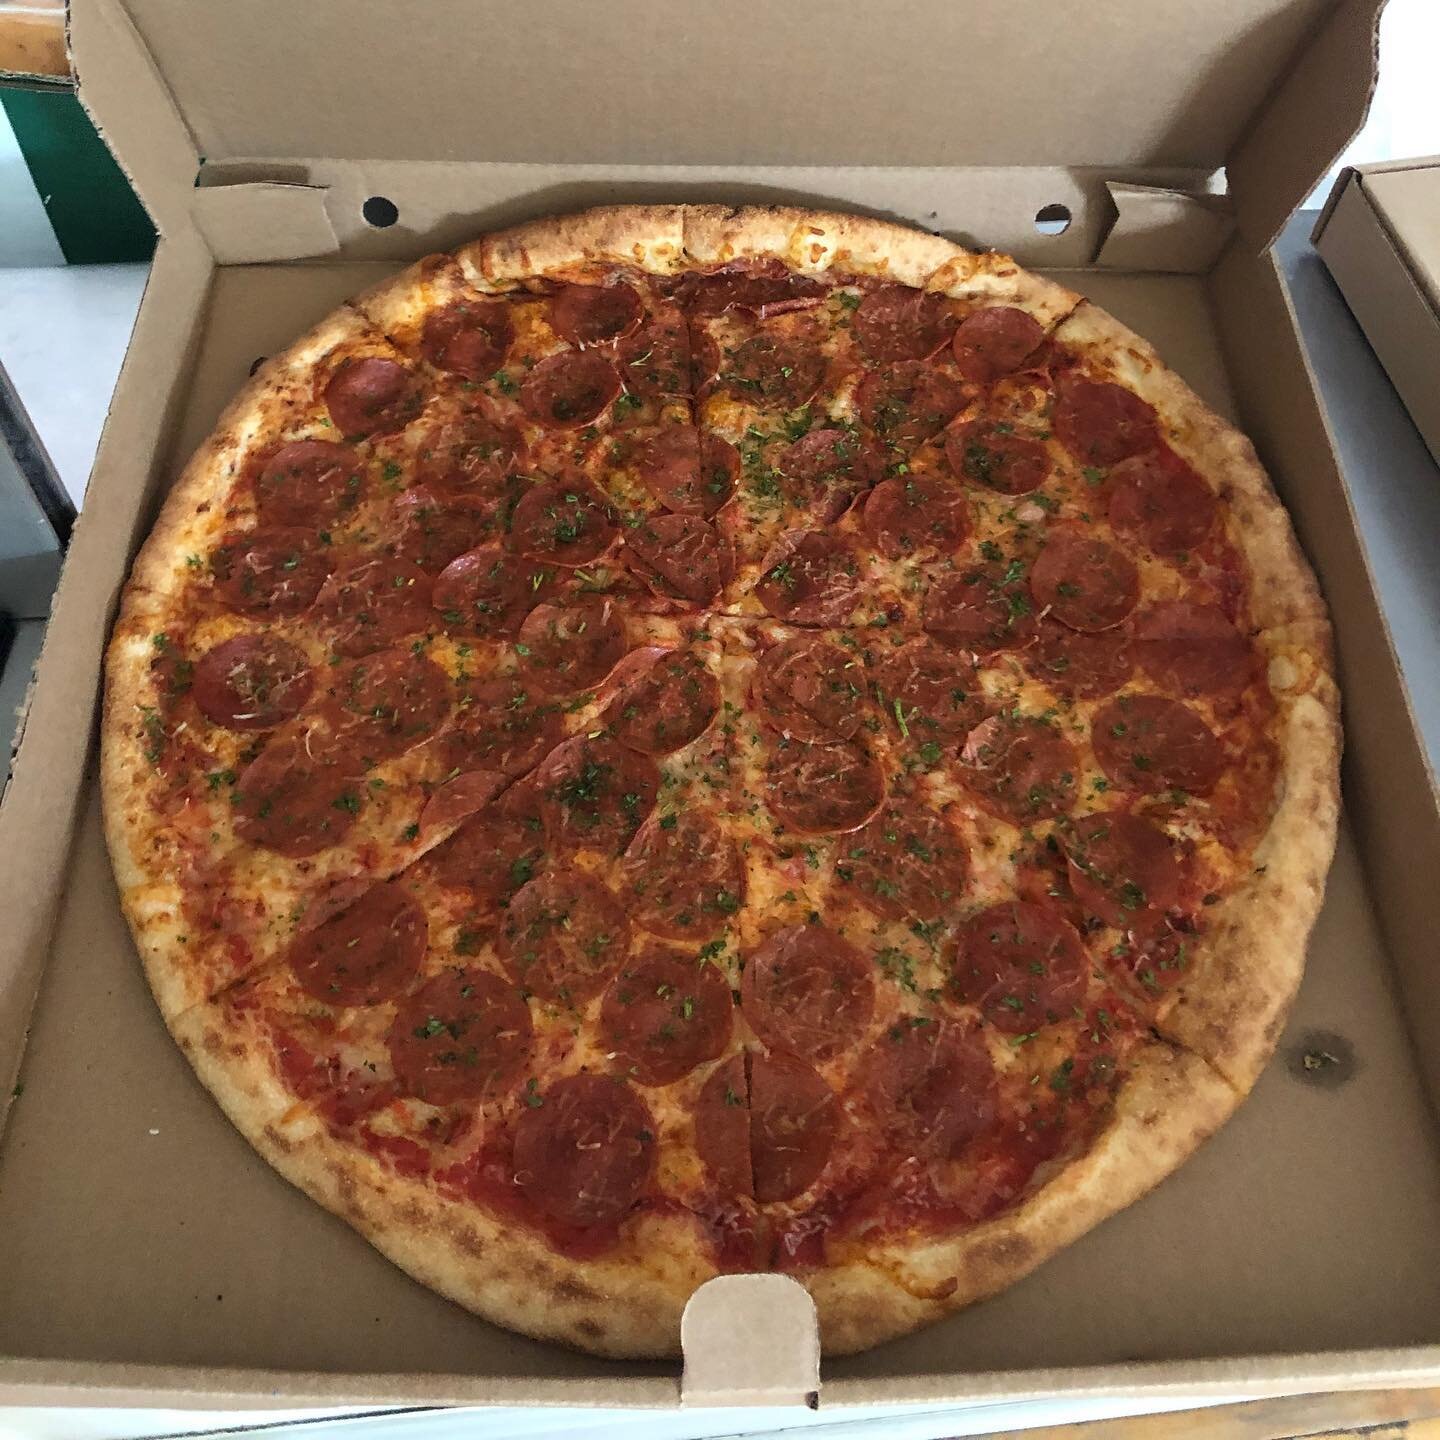 Thanks to @morriseast for donating our pizza this week! Today was our third week of running our weekly lockdown hot-meals project! It seems our YouthNet Instagram feed will exclusively be pictures of pizza until we are able to have our youth back in-